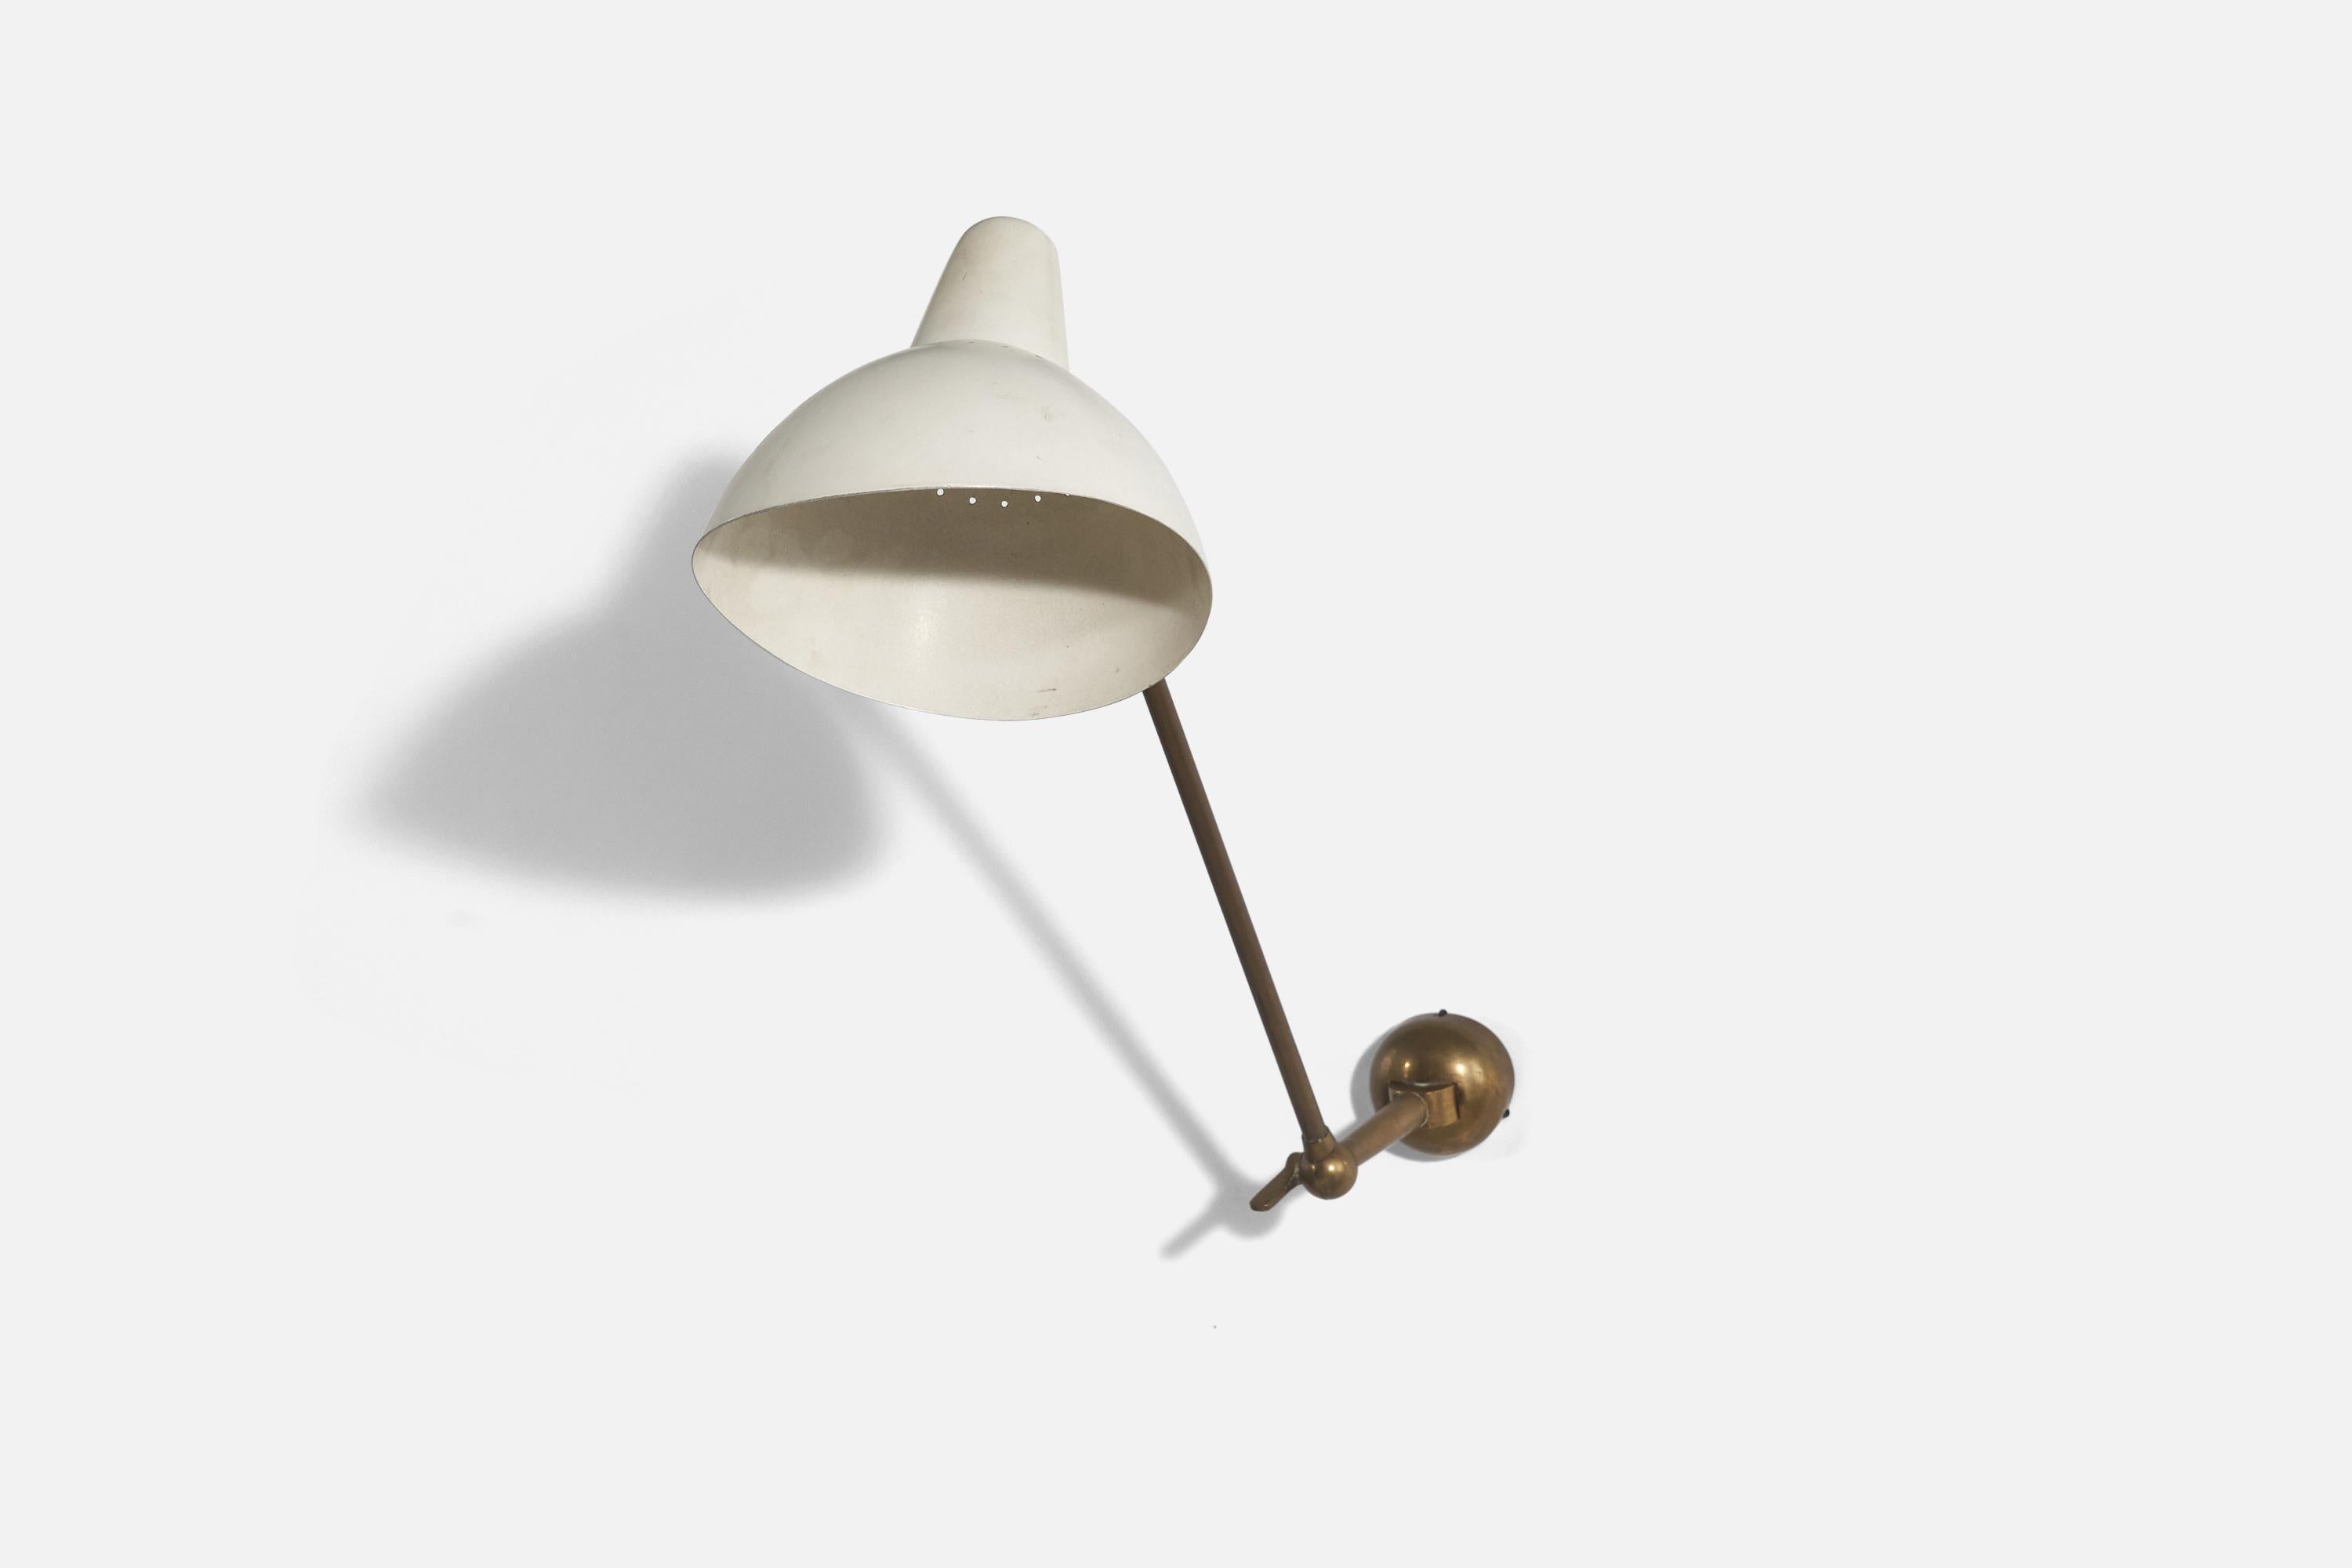 Mid-20th Century Vittorio Viganò Attributed Wall Light, Brass, White Lacquered Metal, Italy 1950s For Sale